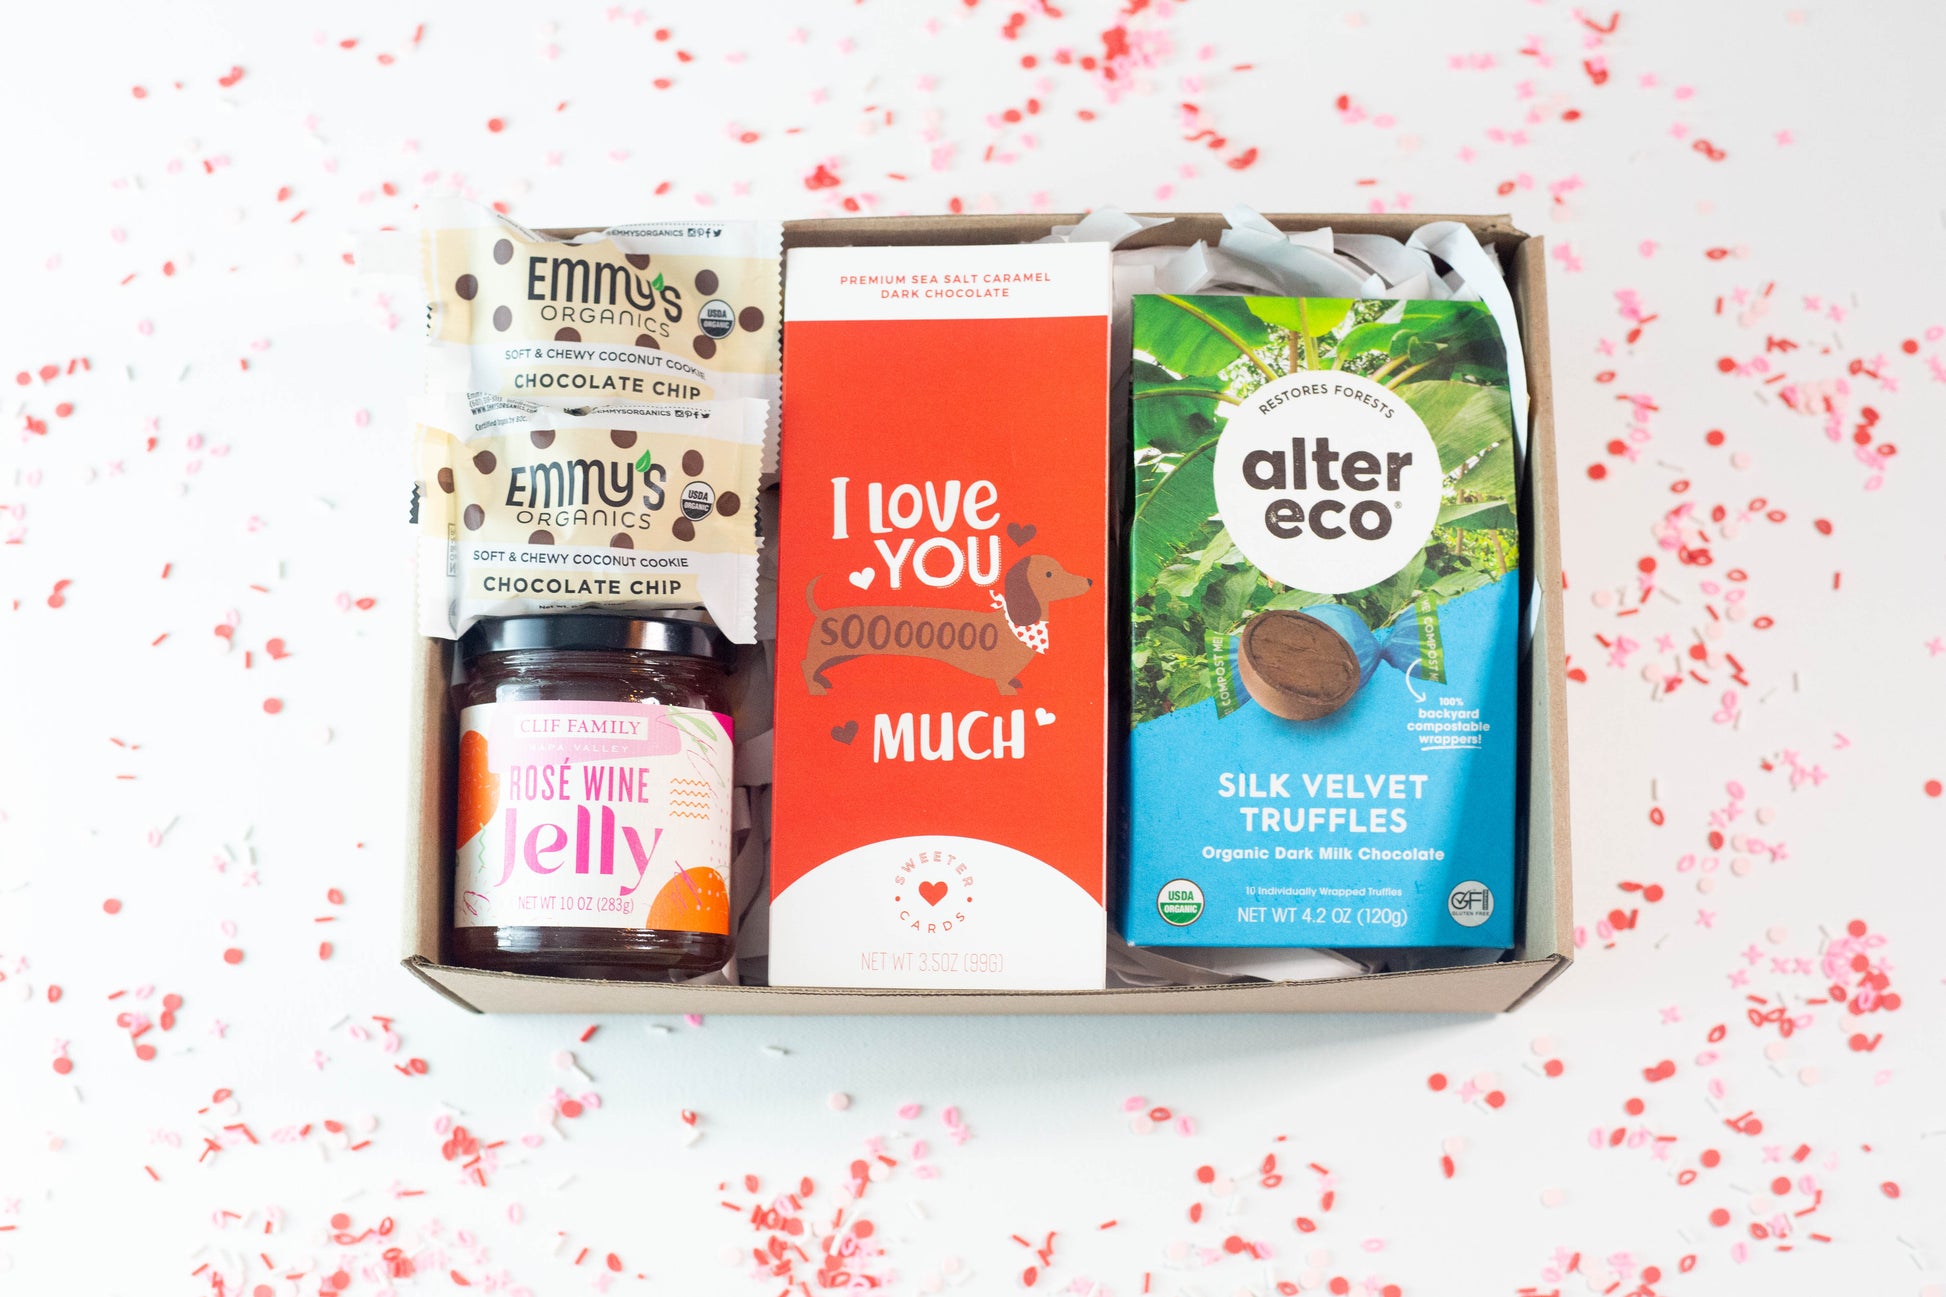 Valentine's Day Box - Chocolate Edition  better made easy with Rose Wine Jelly  -better made easy-eco-friendly-sustainable-gifting